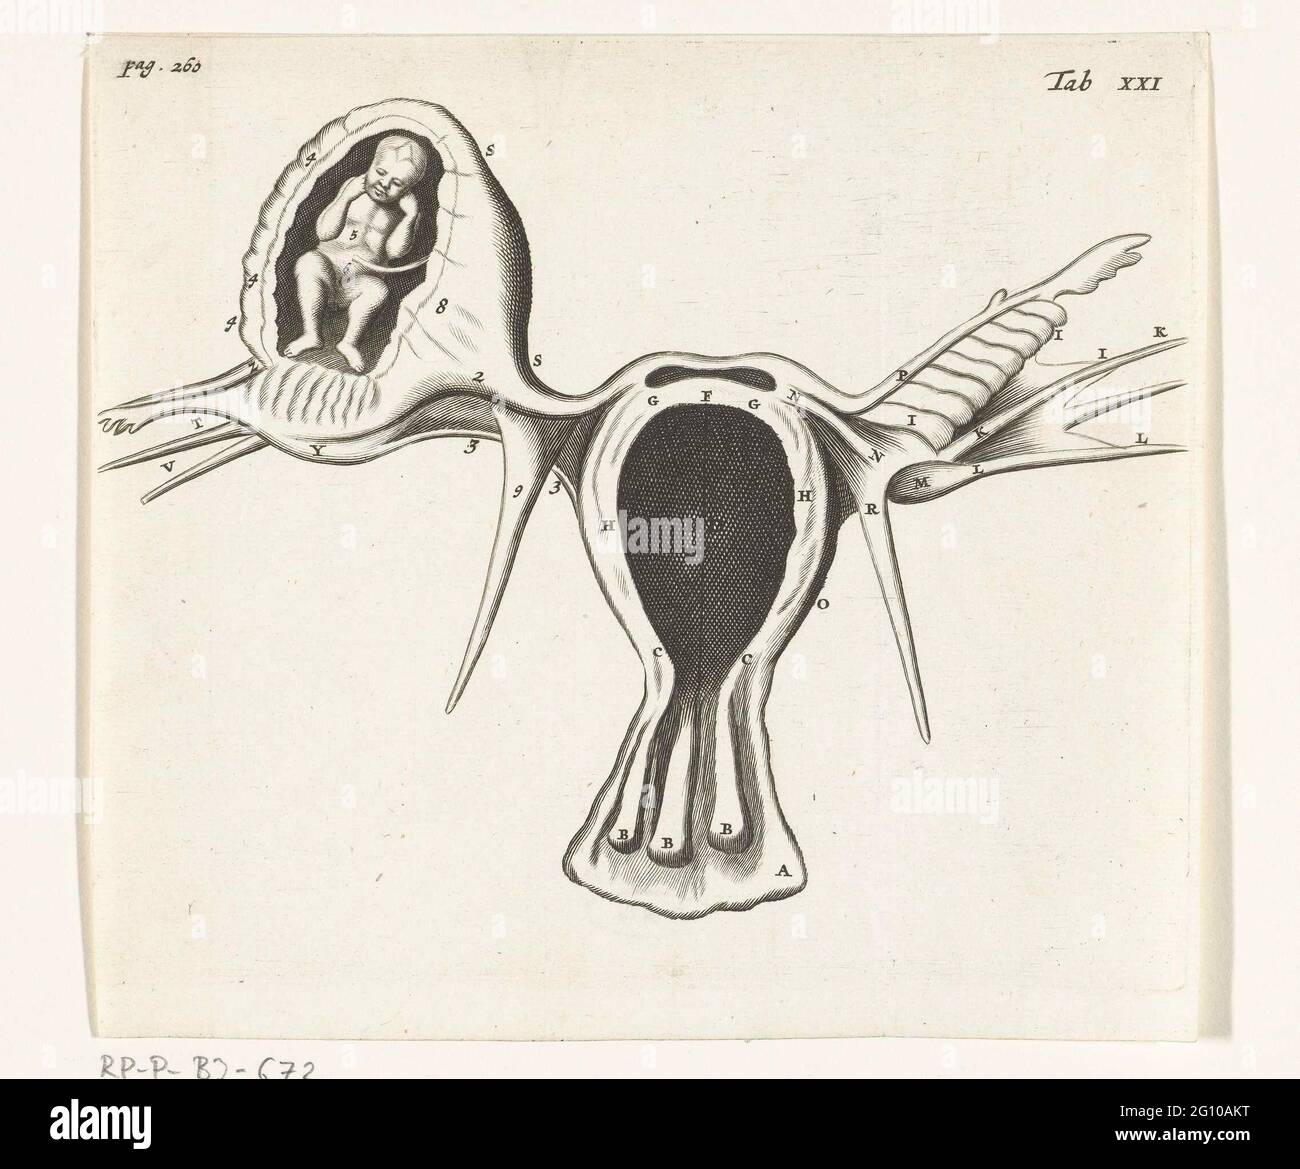 Anatomical depiction of an ectopic pregnancy. In 1672 physician and anatomist Reinier de Graaf published De mulierum organis, a book about the organs of the female body, with prints by Hendrik Bary. De Graaf was the first to conclude that a foetus grows from the mother’s egg cell after it is fertilised by the father’s seed. He also discusses anomalies such as ectopic pregnancies (when the fertilised egg implants outside the womb). Stock Photo